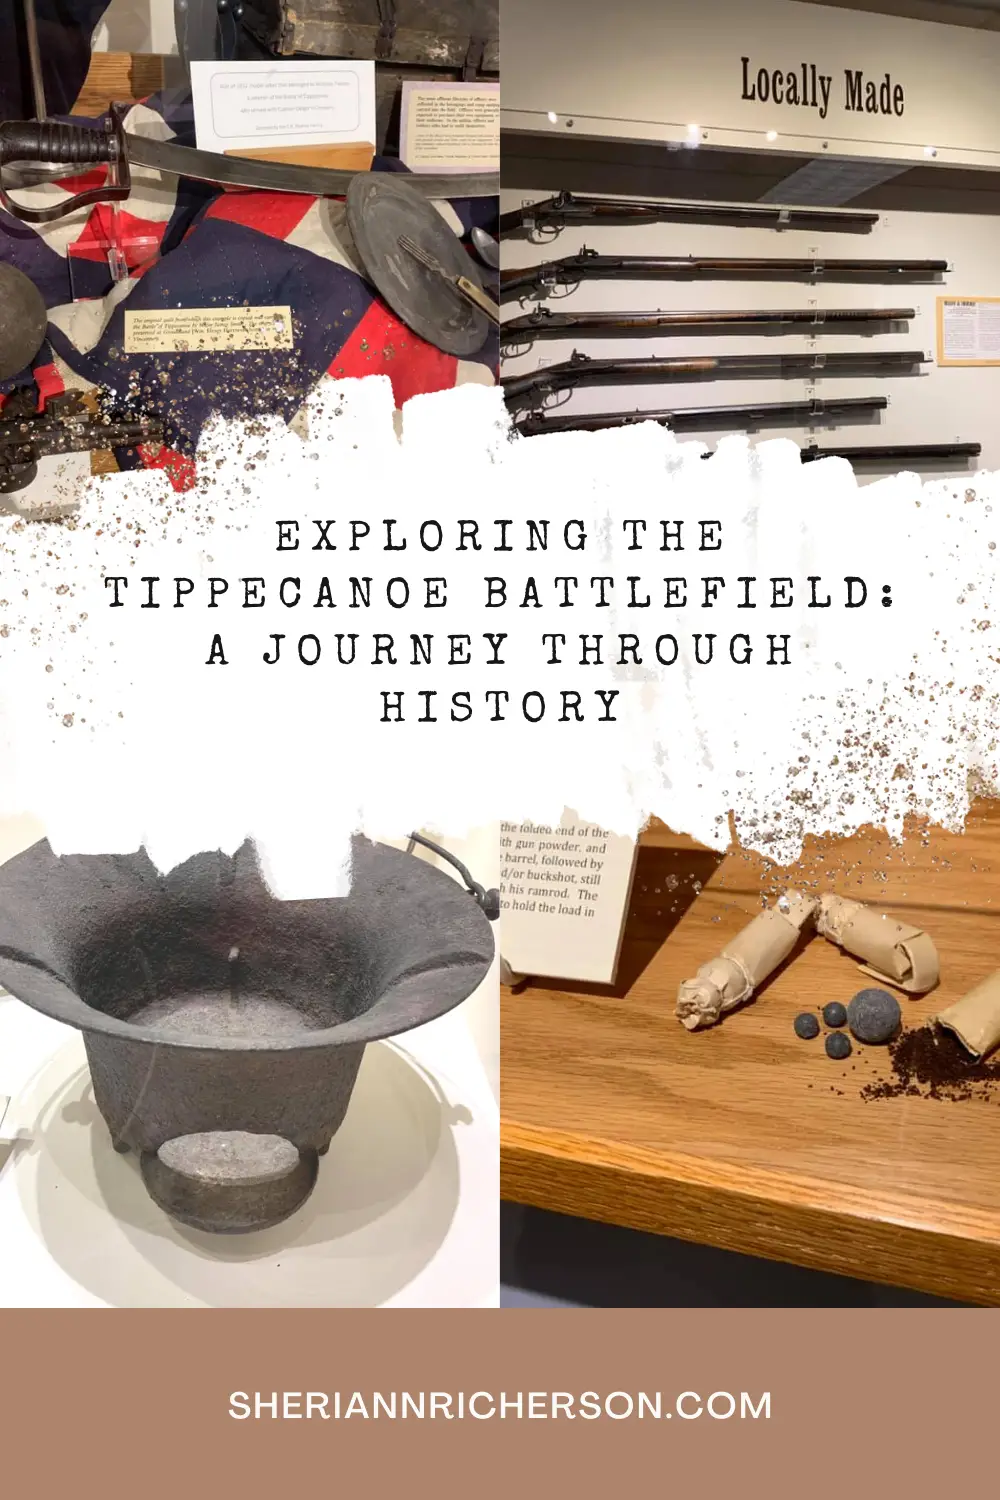 Images from the Museum at the Tippecanoe Battle site.